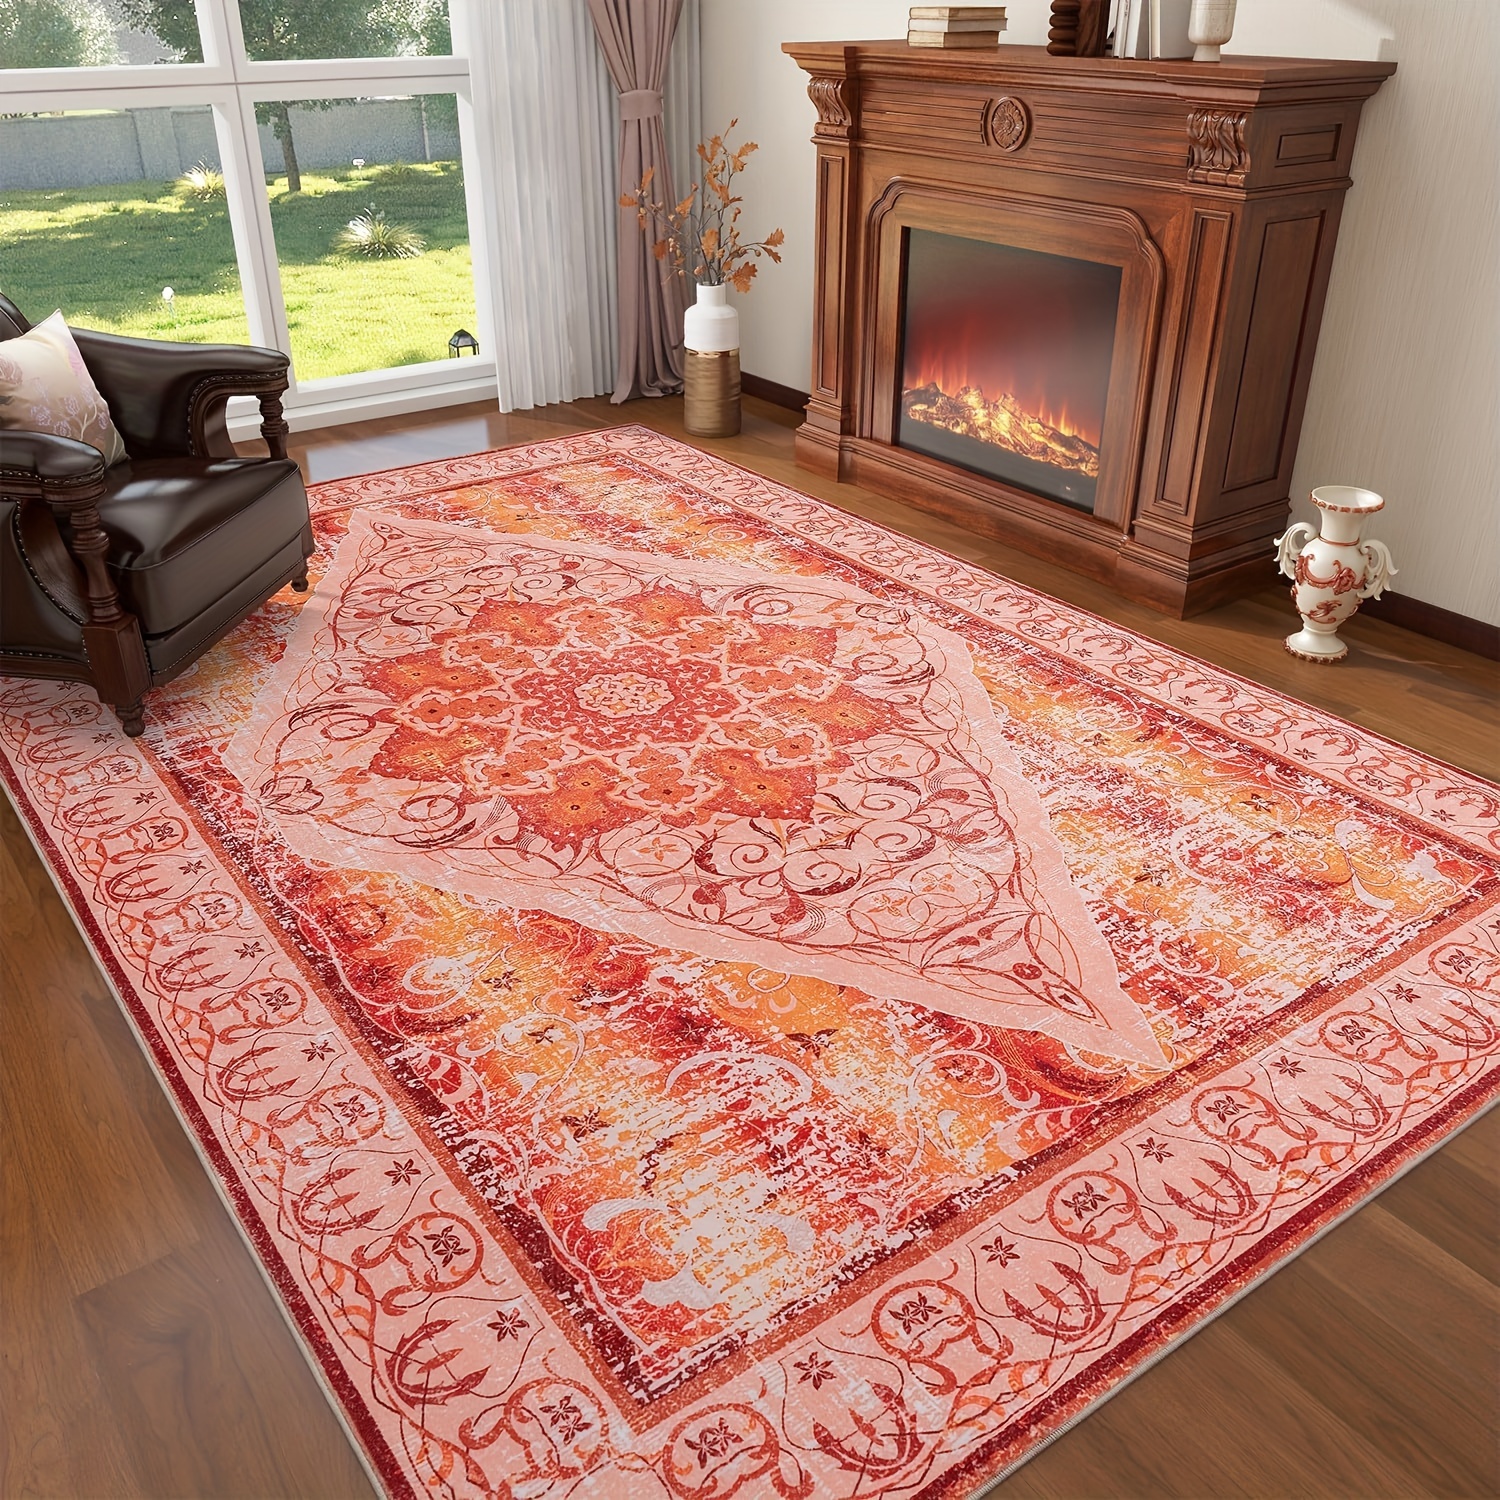 

Boho Area Rugs For Living Room - Washable Rugs, Ultra-thin Oriental Large Rugs, Red Print Distressed Rugs, Soft Non-shedding Indoor Non-slip Carpet For Bedroom Dining Room Farmhouse